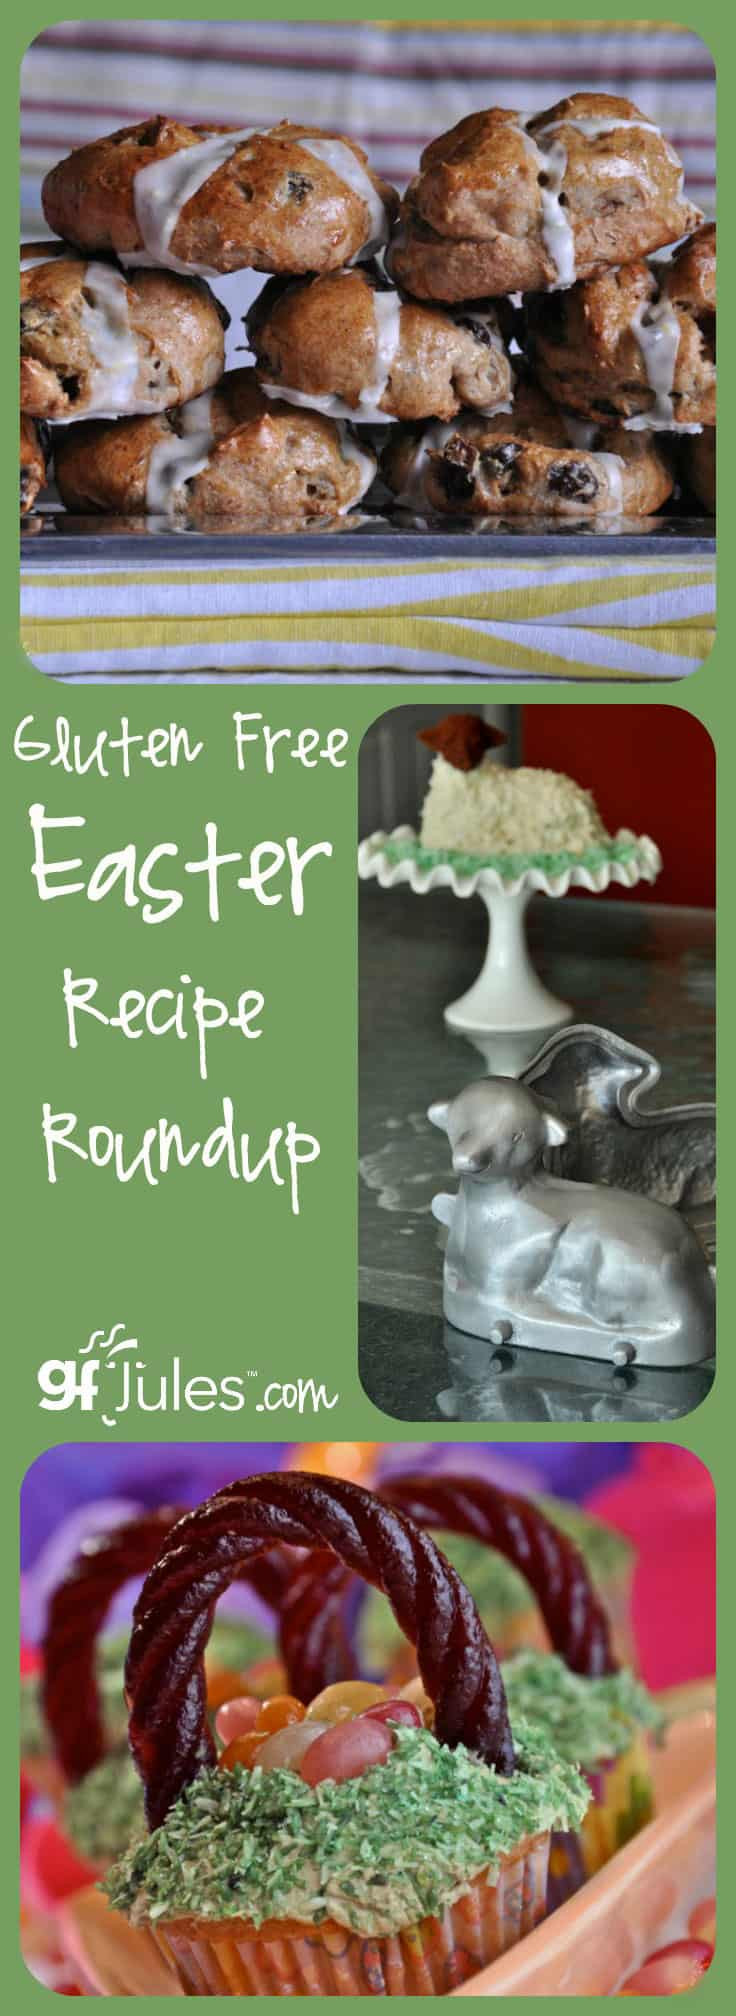 Gluten Free Easter Recipes
 Gluten Free Easter Recipe Round Up gfJules makes